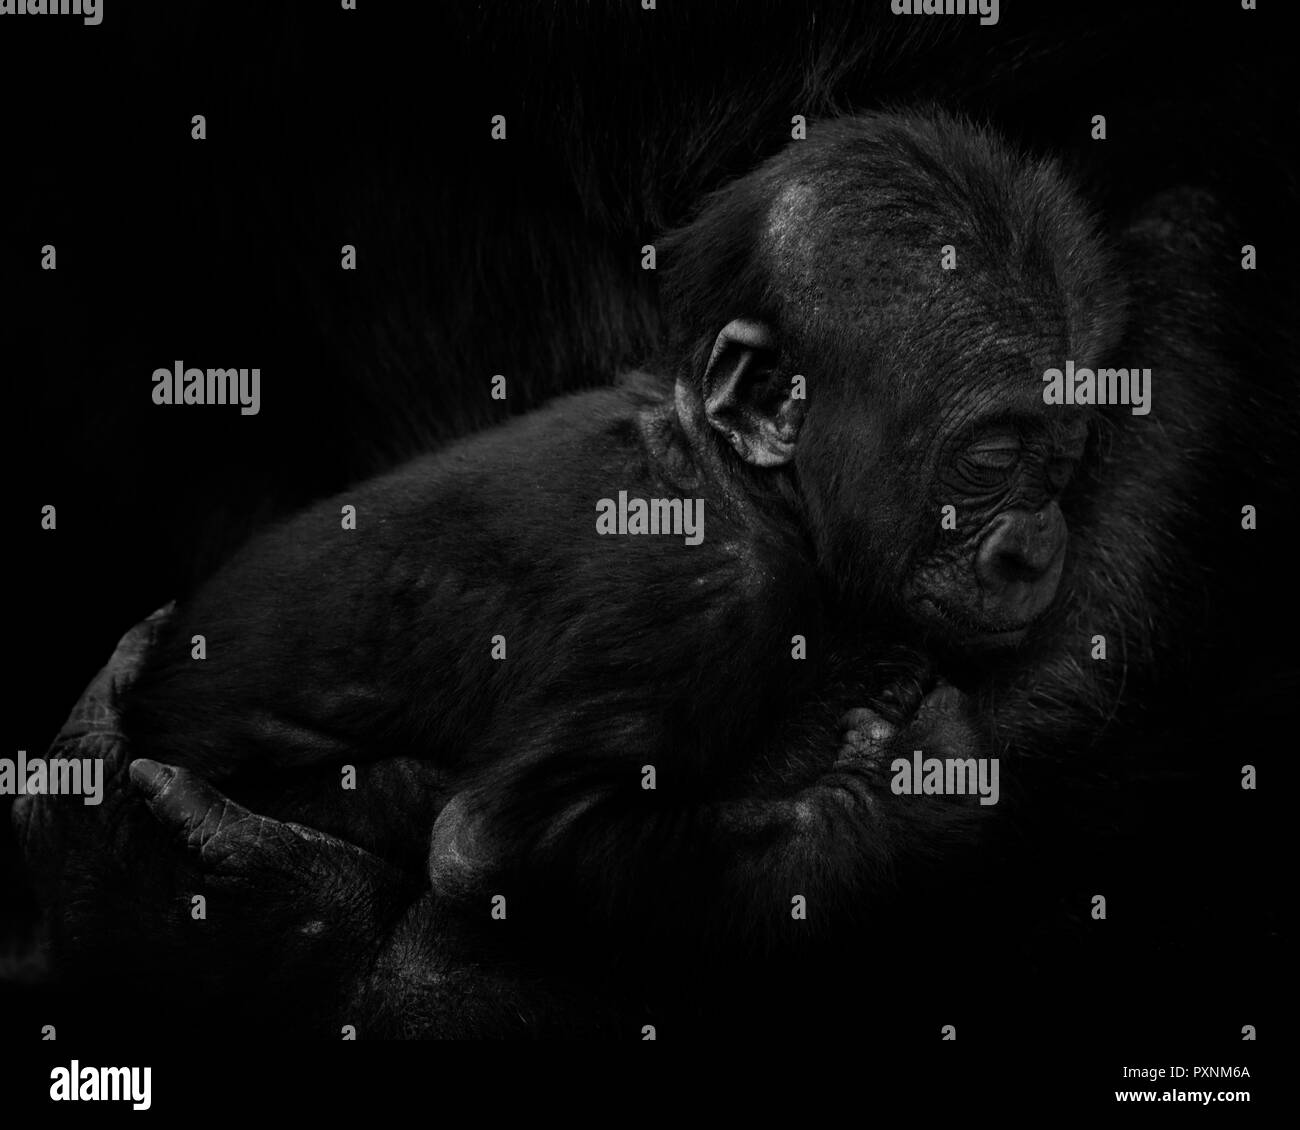 Gorilla baby in mother's arms in front of black background Stock Photo